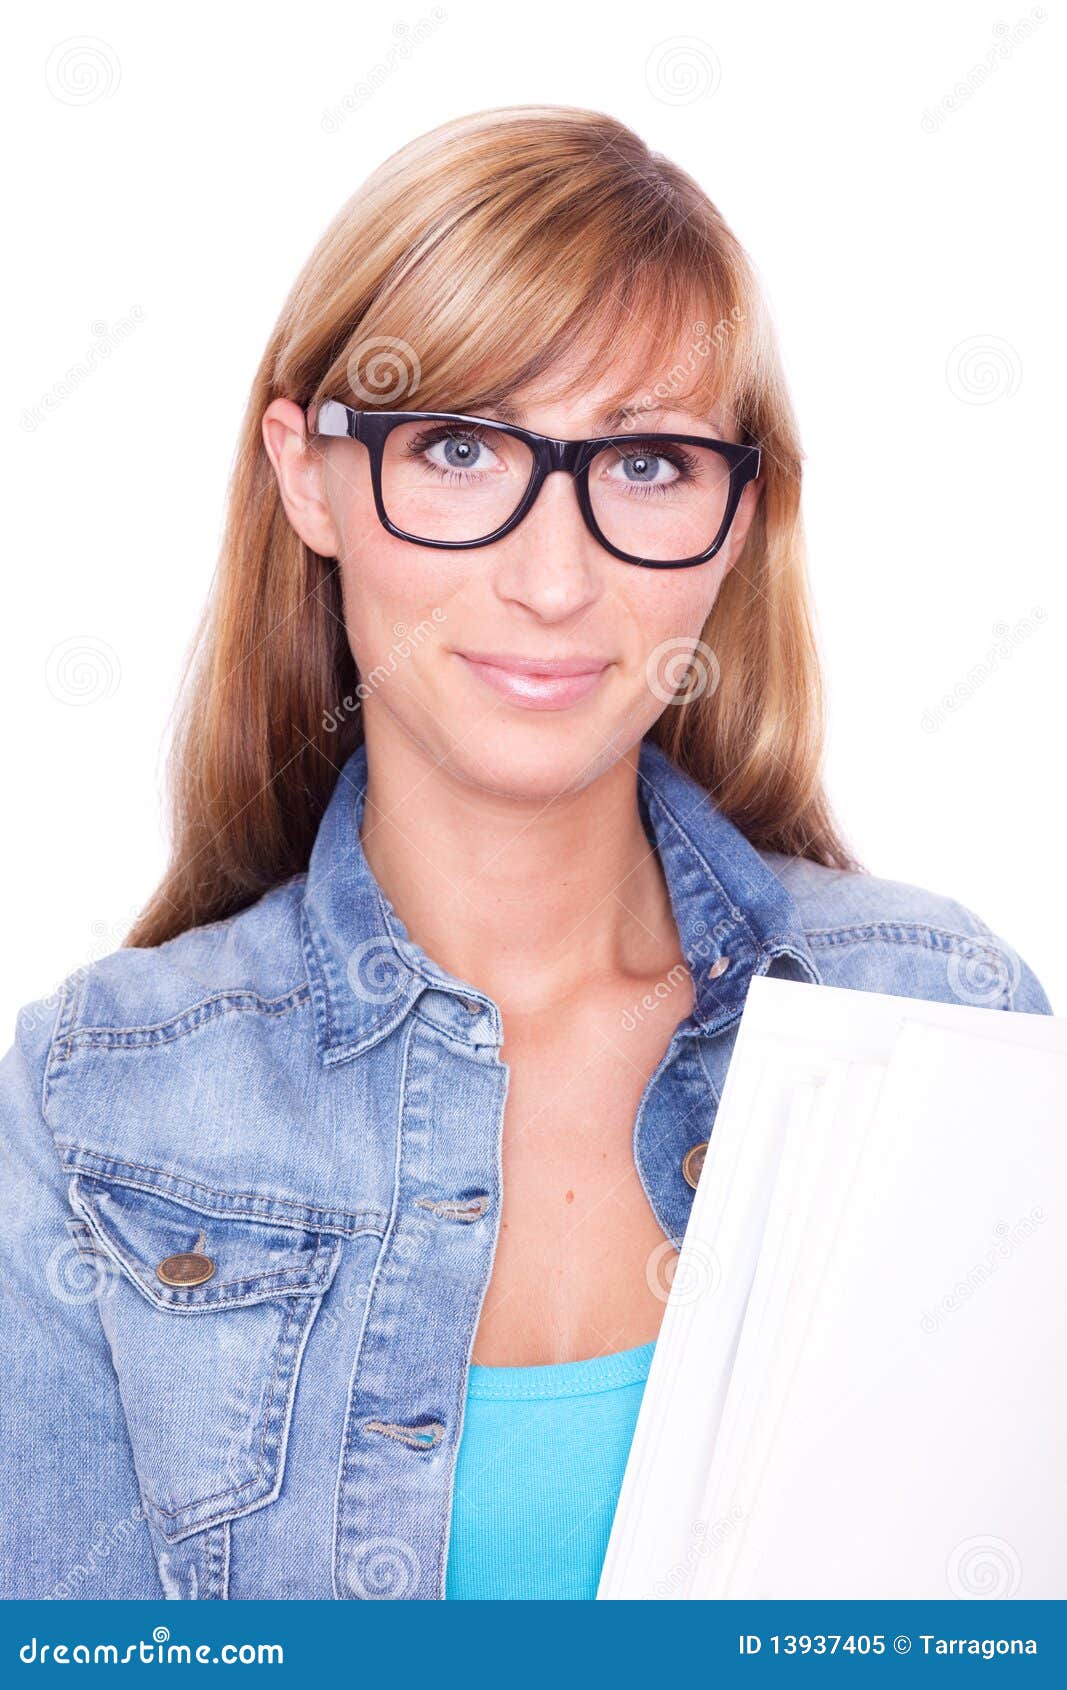 Student portrait stock image. Image of adult, smiling - 13937405